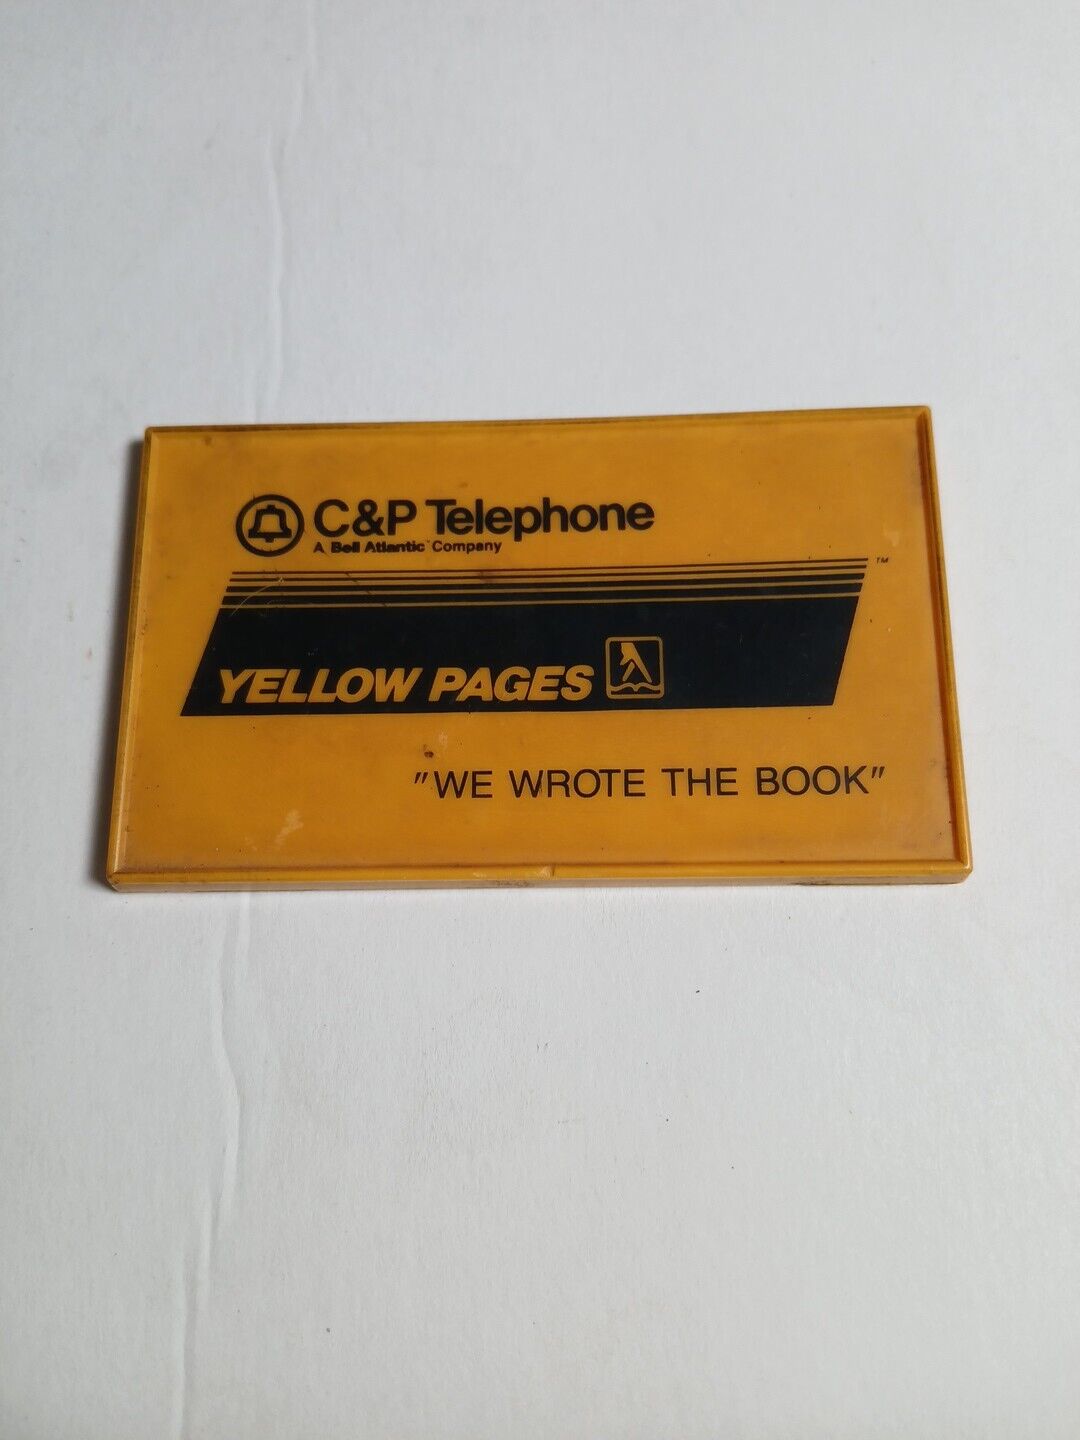 VINTAGE BELL ATLANTIC C&P TELEPHONE ADVERTISING YELLOW PAGES MAGNET